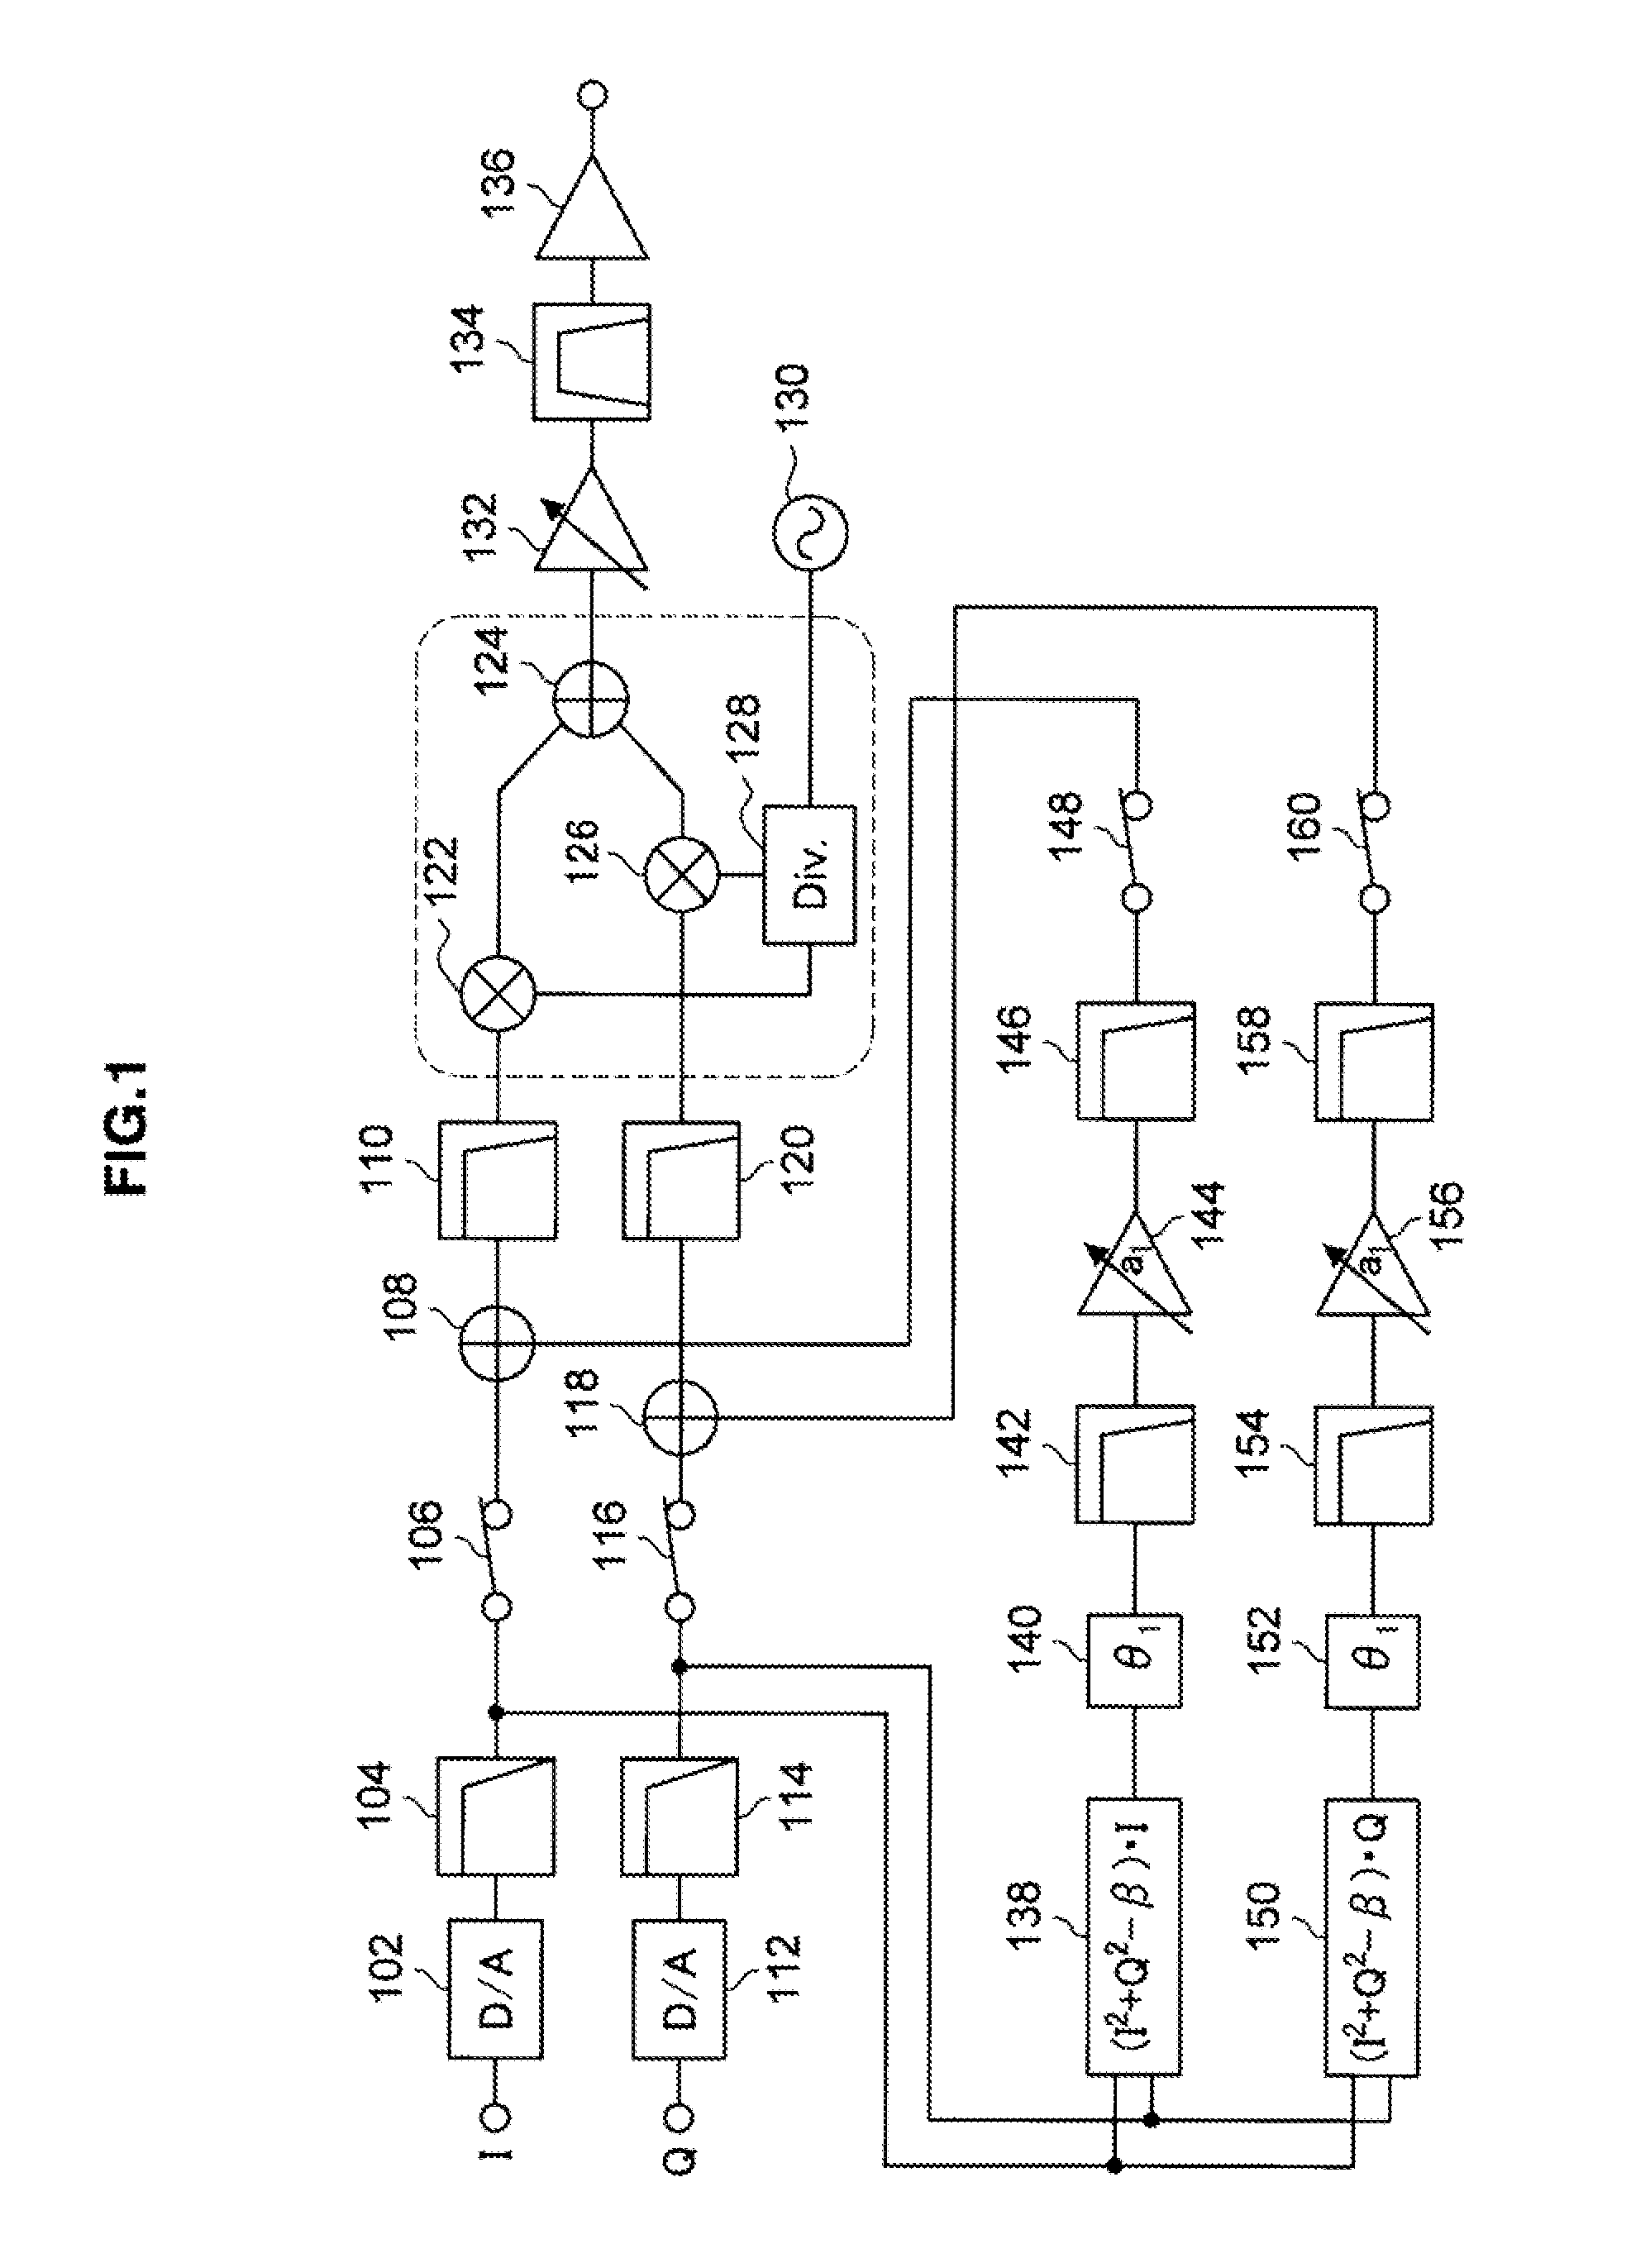 Distortion compensator and wireless communication device